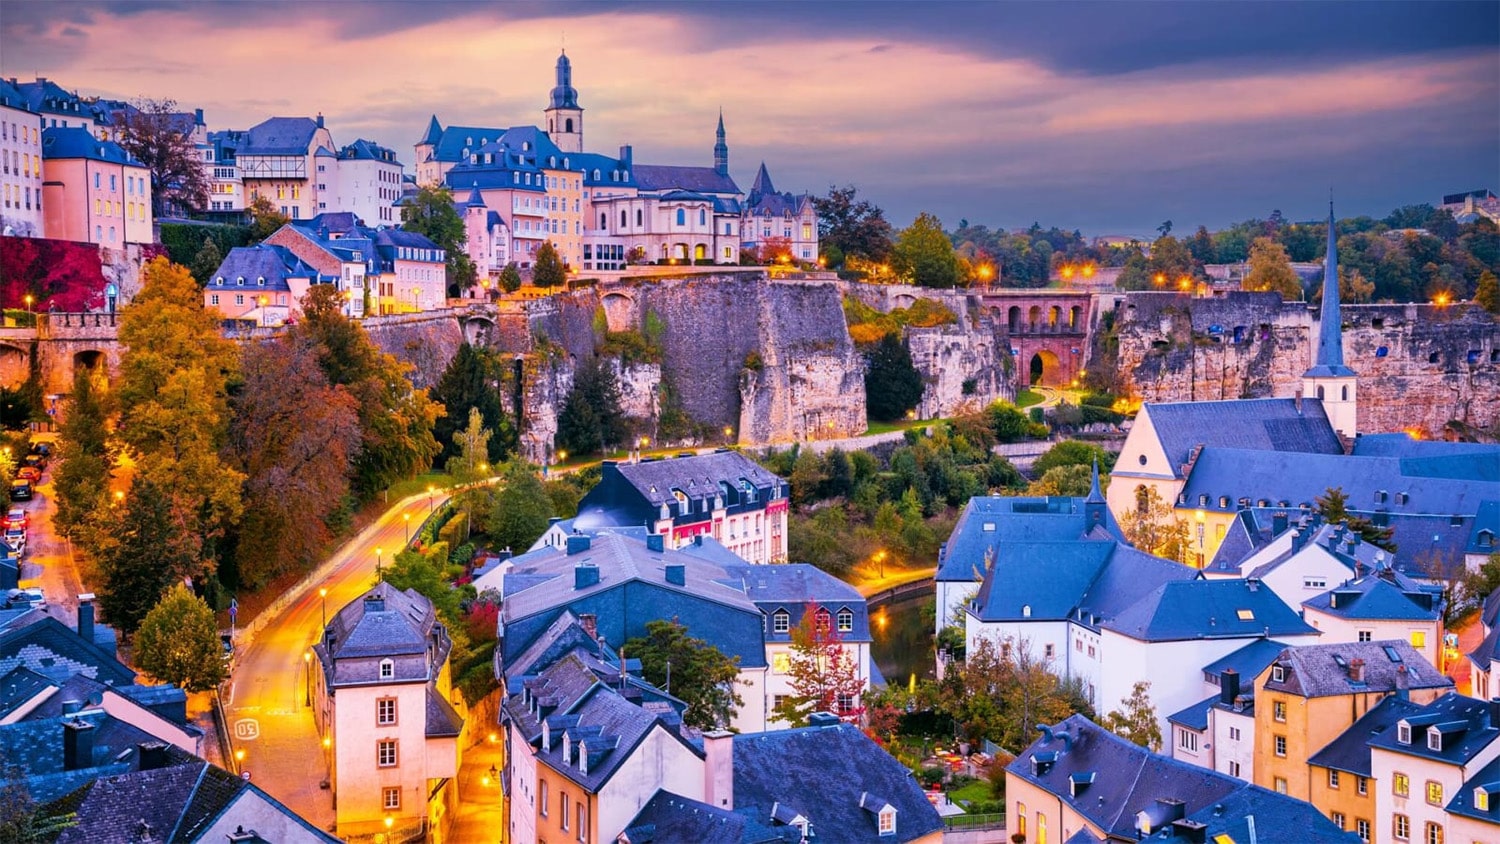 28 interesting facts about Luxembourg